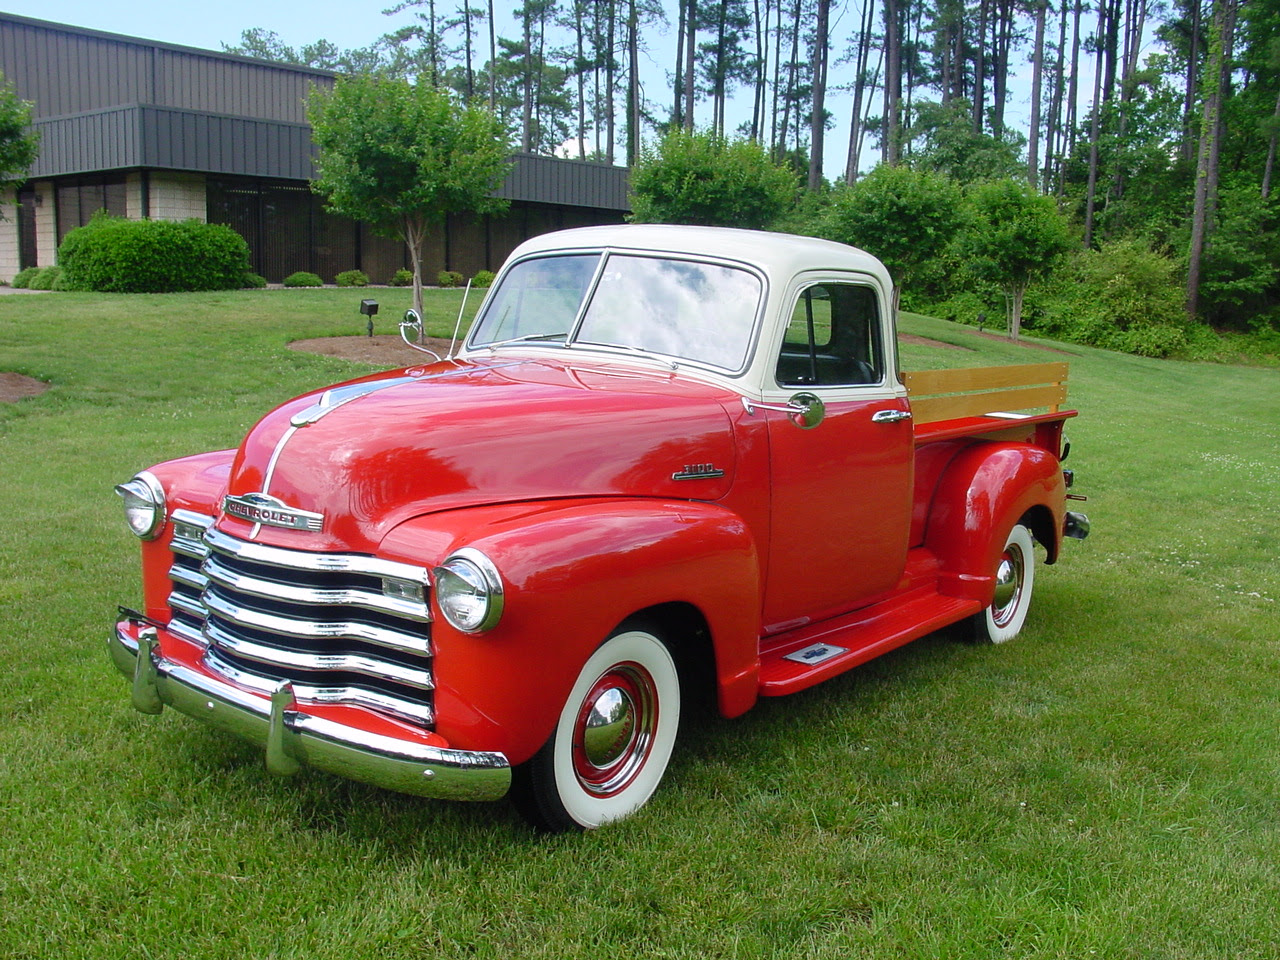 Tuning cars and News: 1950 Chevrolet 3100 Pickup